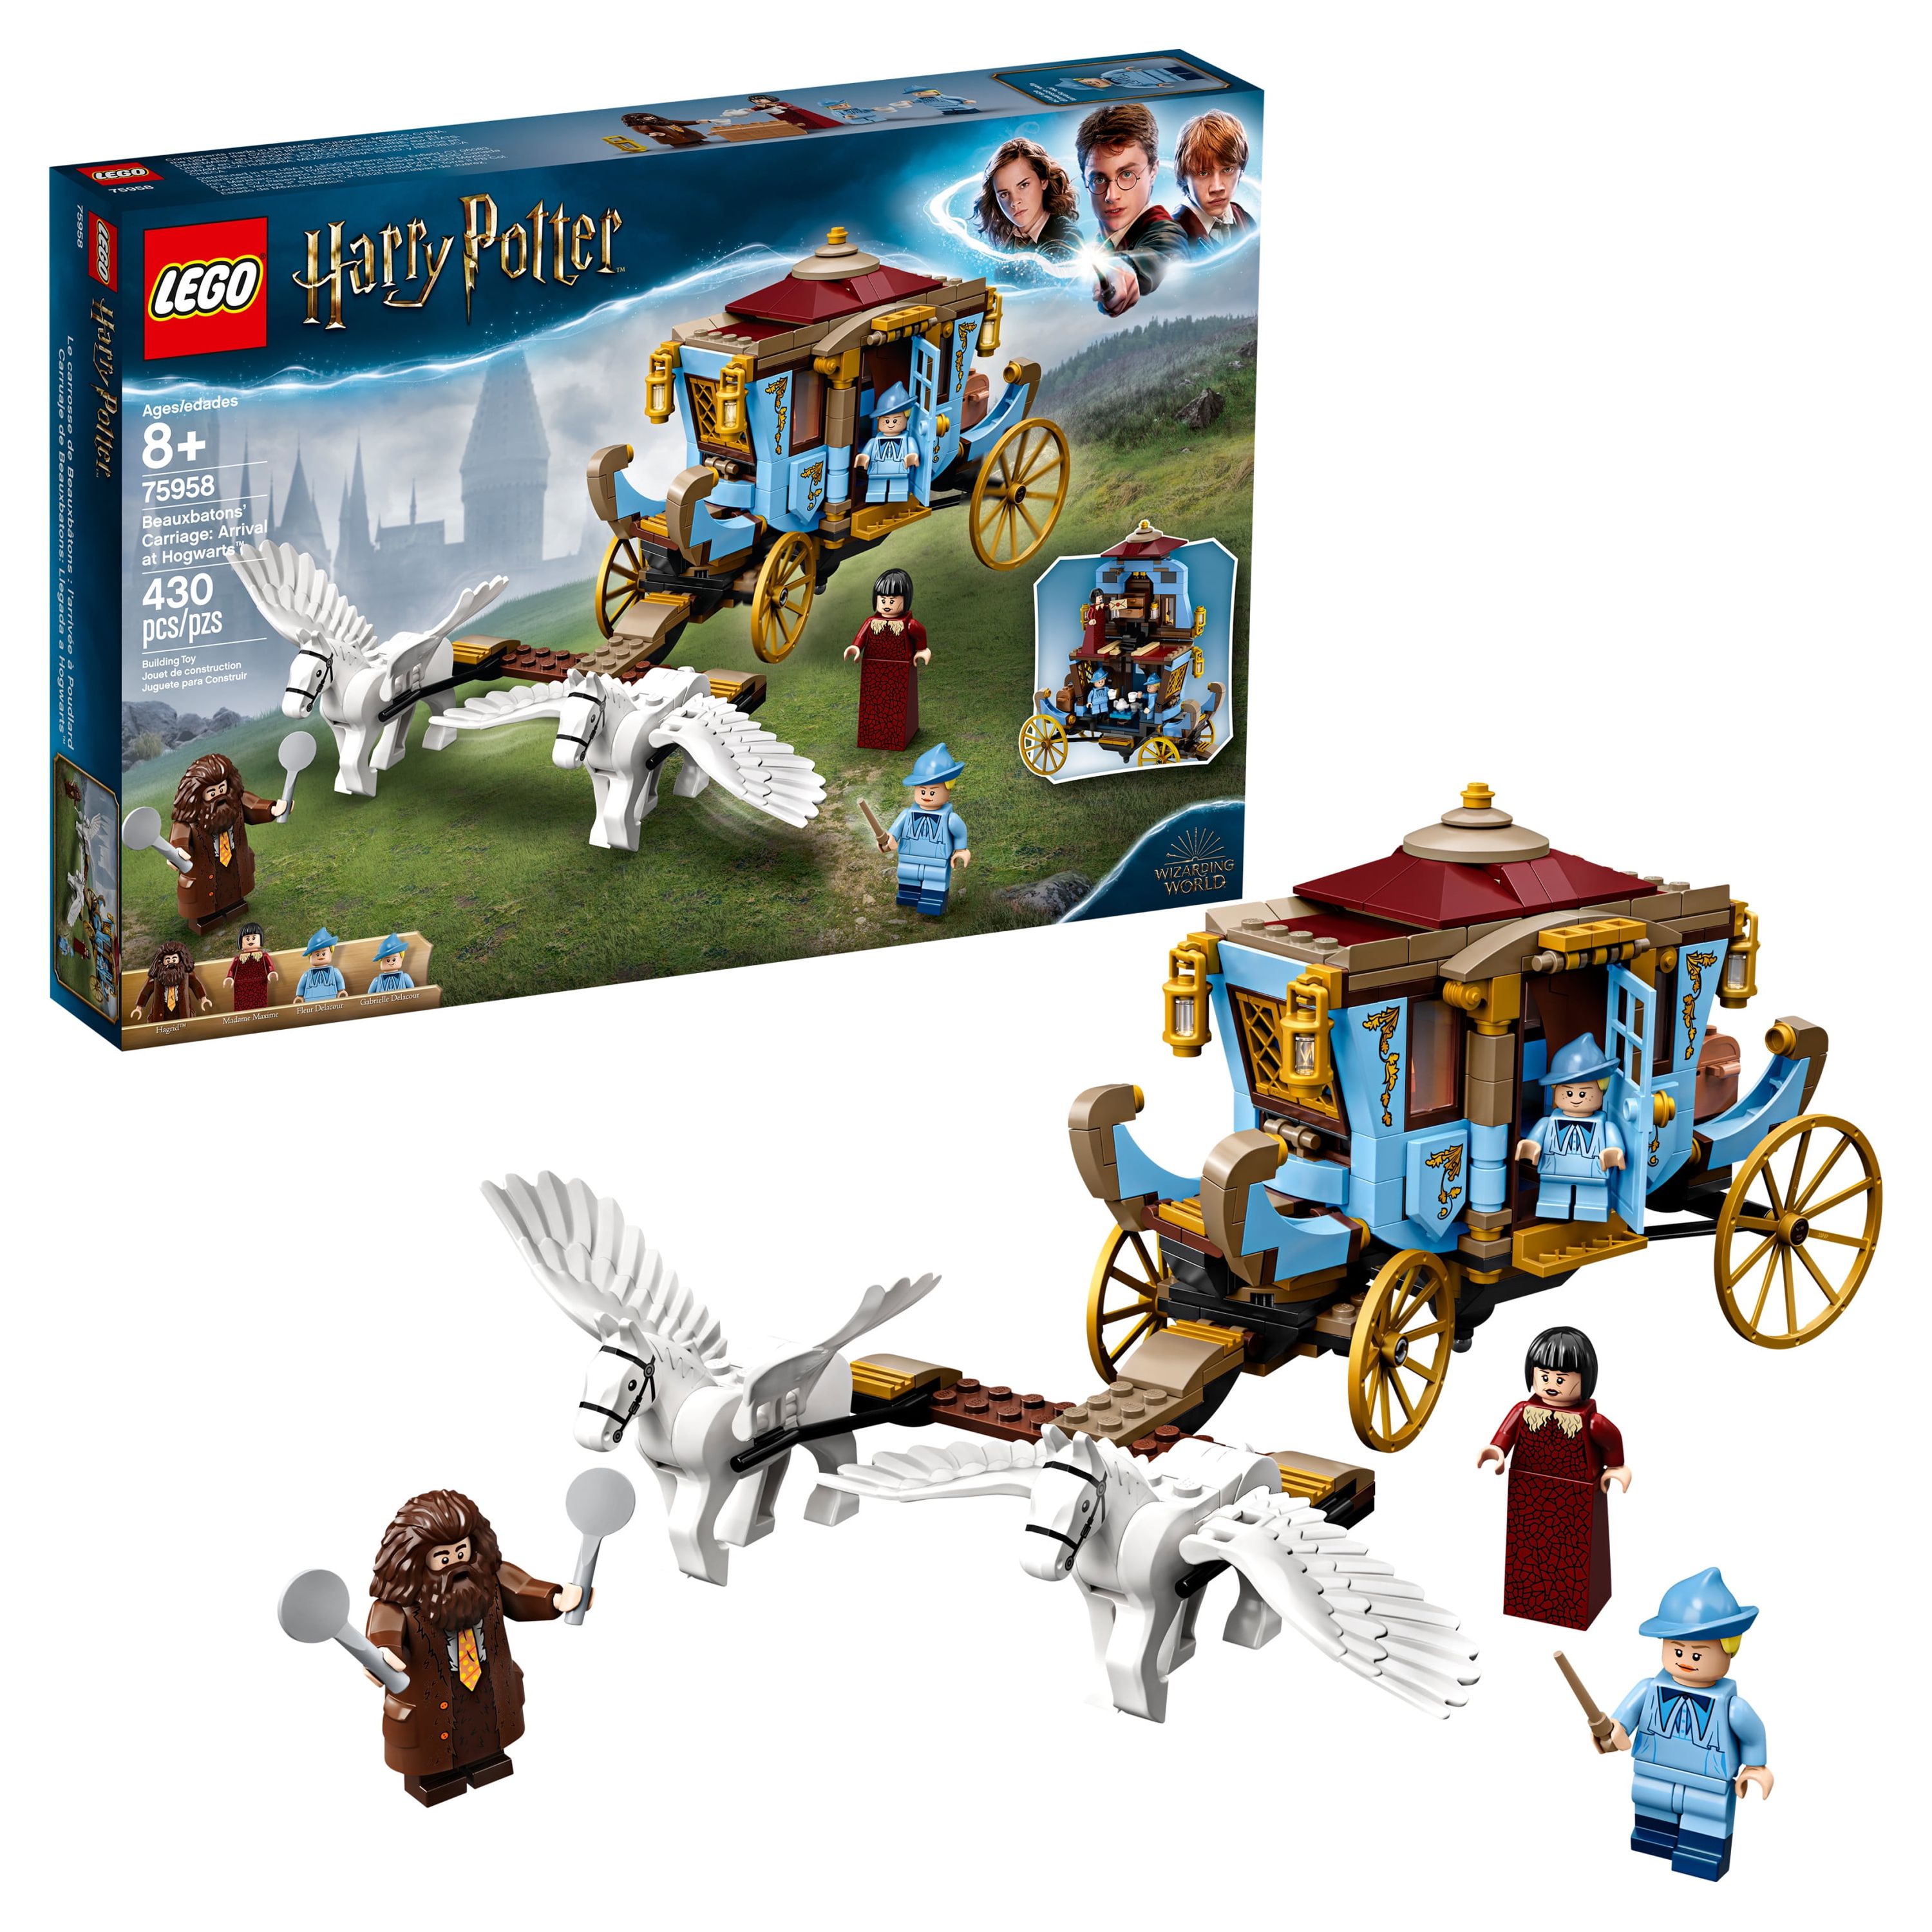 LEGO Harry Potter and the Goblet of Fire Beauxbatons' Carriage: Arrival at Hogwarts 75958 Wizard Hagrid Horses Building Toy (430 Pieces) - image 1 of 5